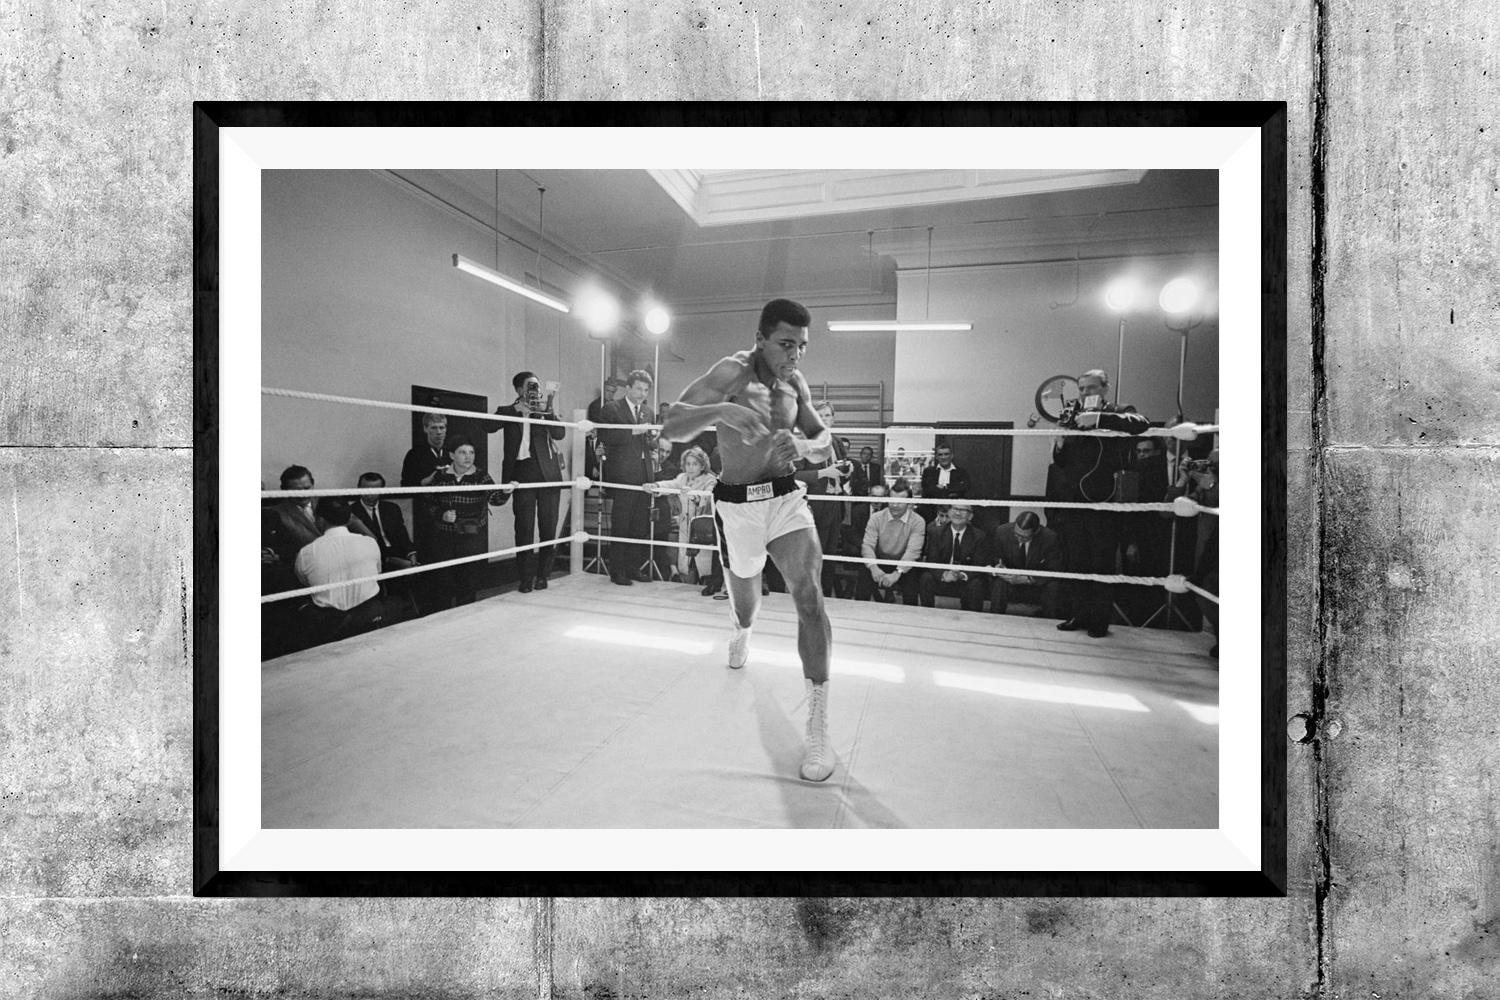 'Ali in Training' by R. McPhedran, Limited Edition Photograph Print, 20x16 - Gray Black and White Photograph by Unknown